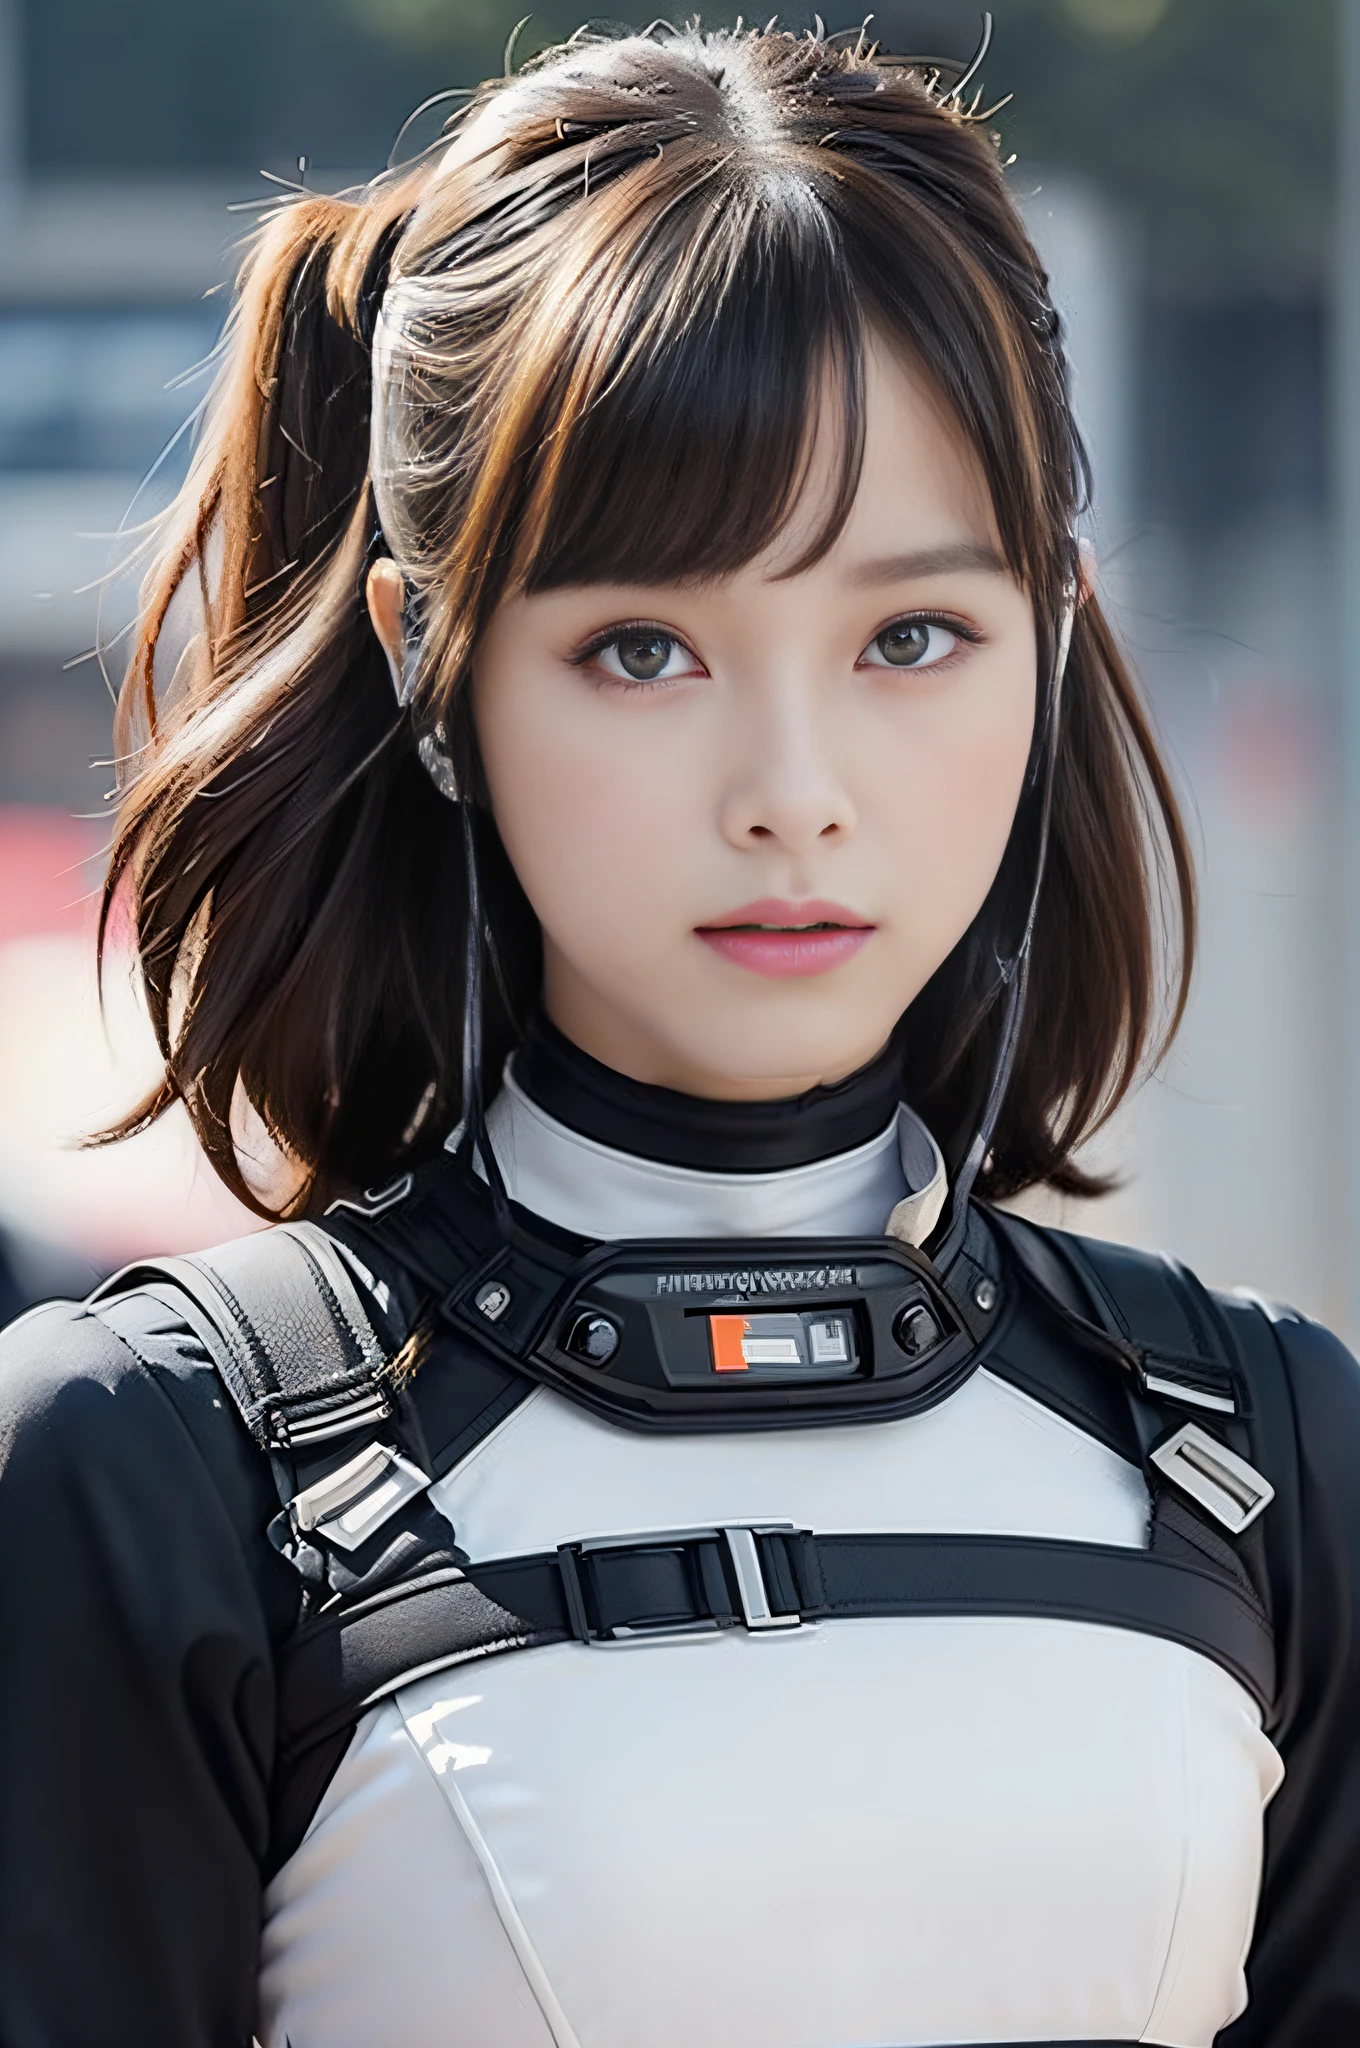 Top Quality, Ultra High Definition, (Photorealistic: 1.4), (close up:1.6, focus on face), 1 Beautiful Girl, (Kpop Idol), Detailed Face, (Hair Color Pink:1, fullbang, updo-style:1), Contrapposto, Perfect Anatomy, Smooth Skin, Professional Lighting, ((wearing Futuristic Police Racing Suits, police wappen, High-tech Headset, military harness, police wappen, racing gloves, machinegun)), ("POLICE", Cloths colors based on silver pink black white), (background, crashed cars, fire, (Explosion)),